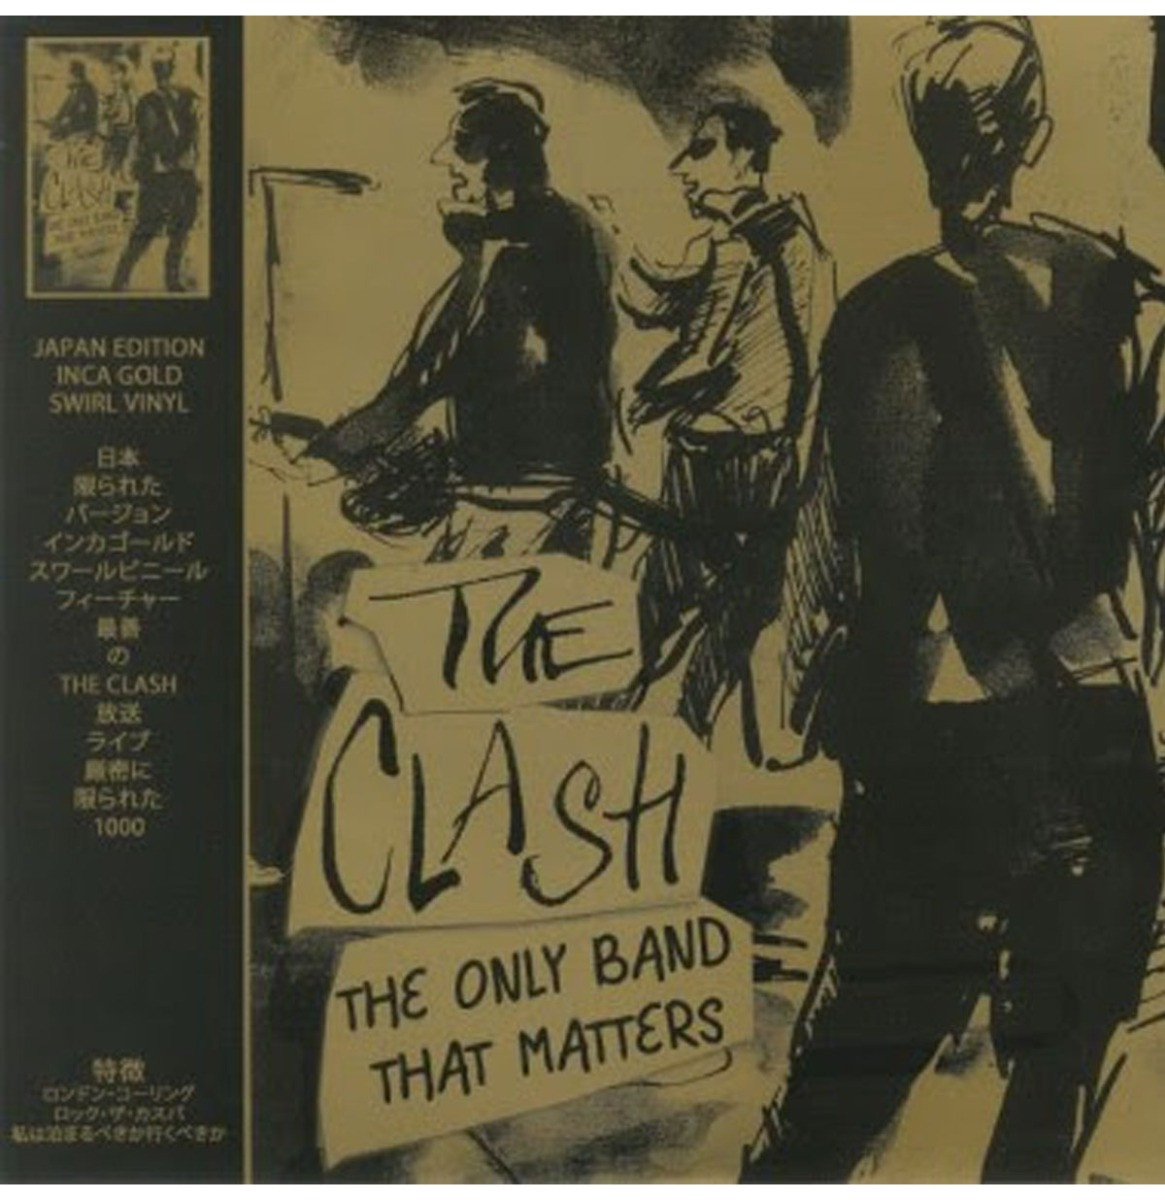 The Clash - The Only Band That Matters (Japan Editie Goud Vinyl) LP